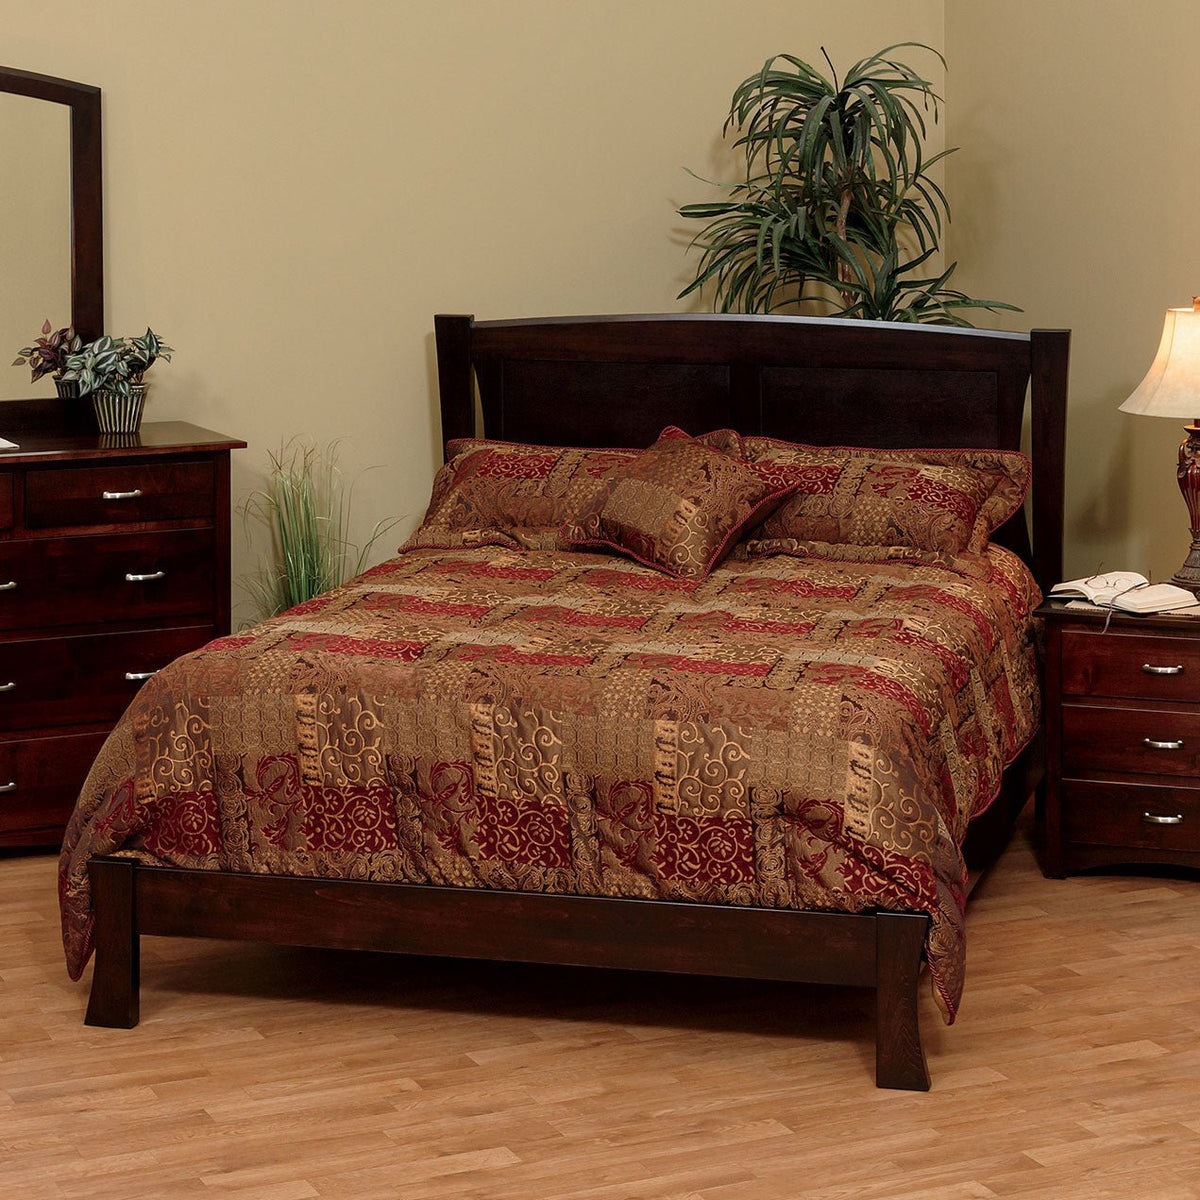 Manchester Amish Bed - snyders.furniture